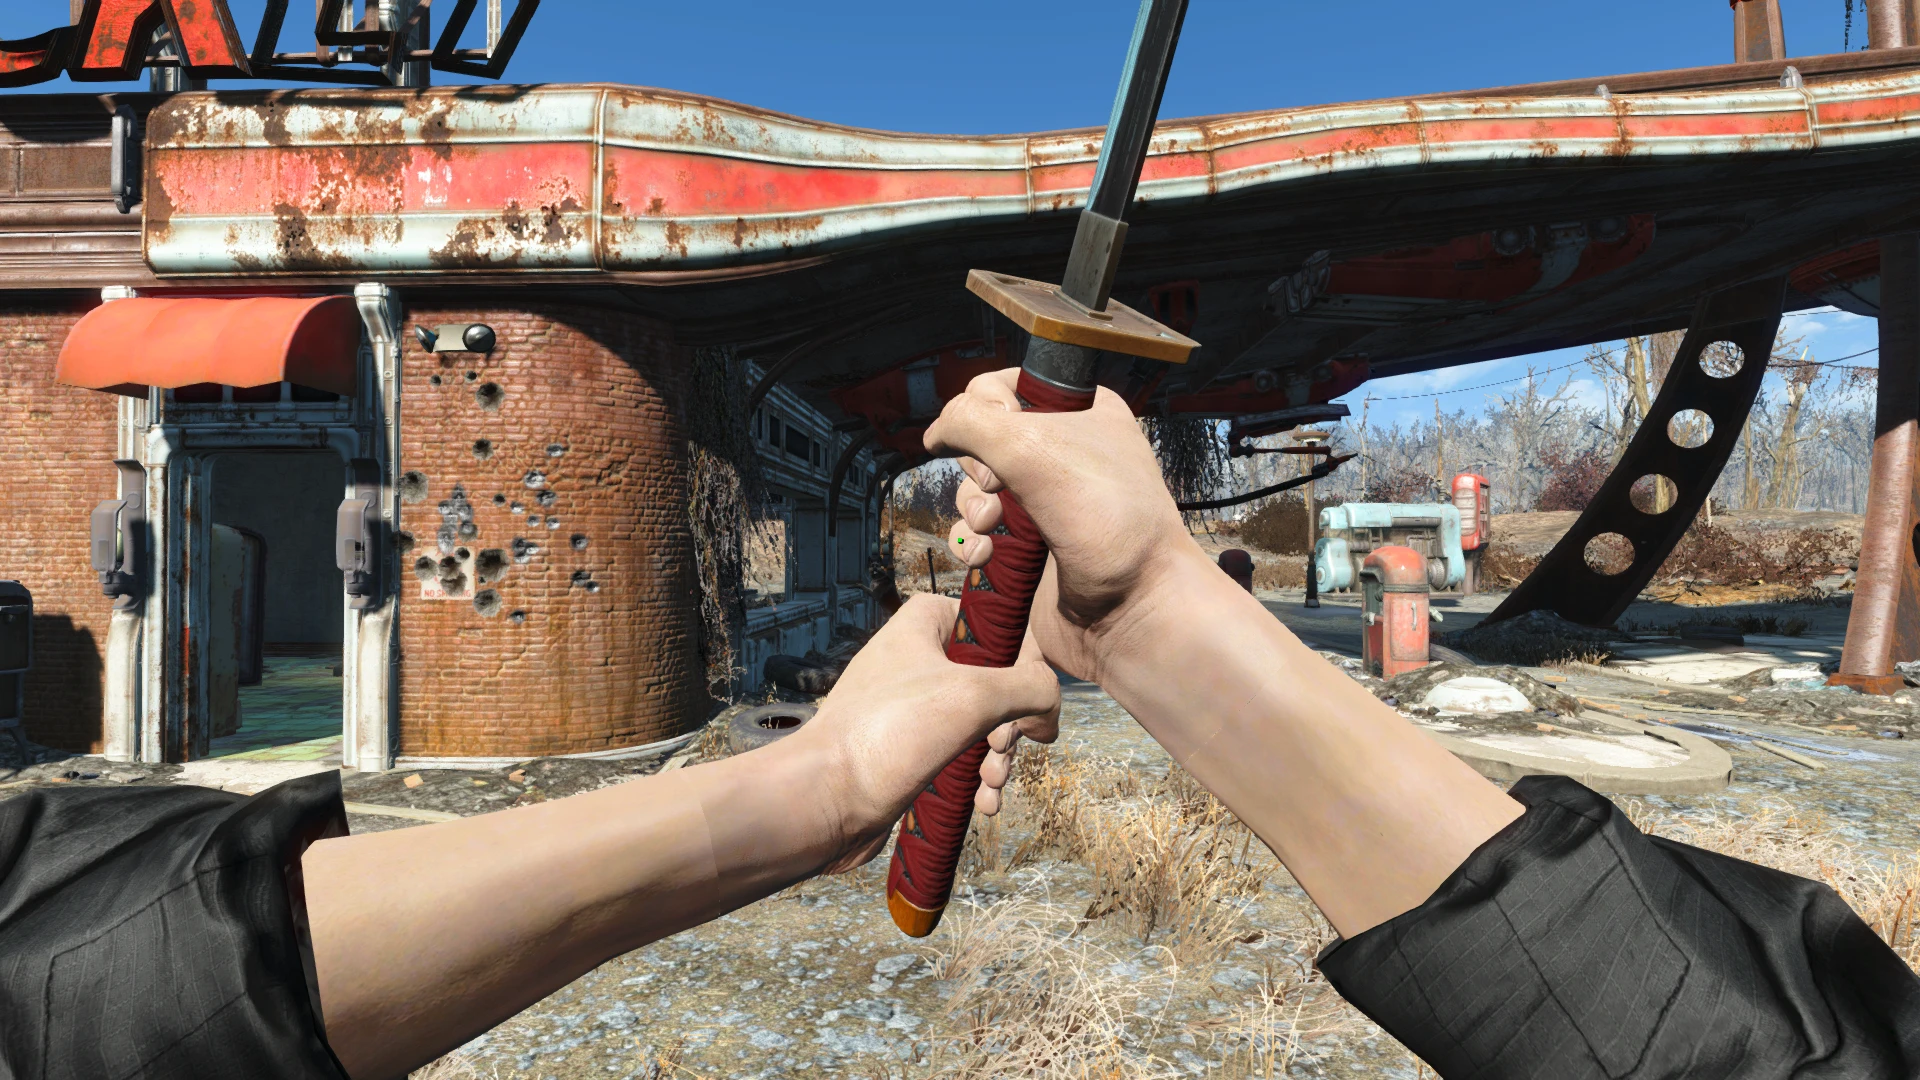 Skibadaa weapon pack at fallout 4 фото 74